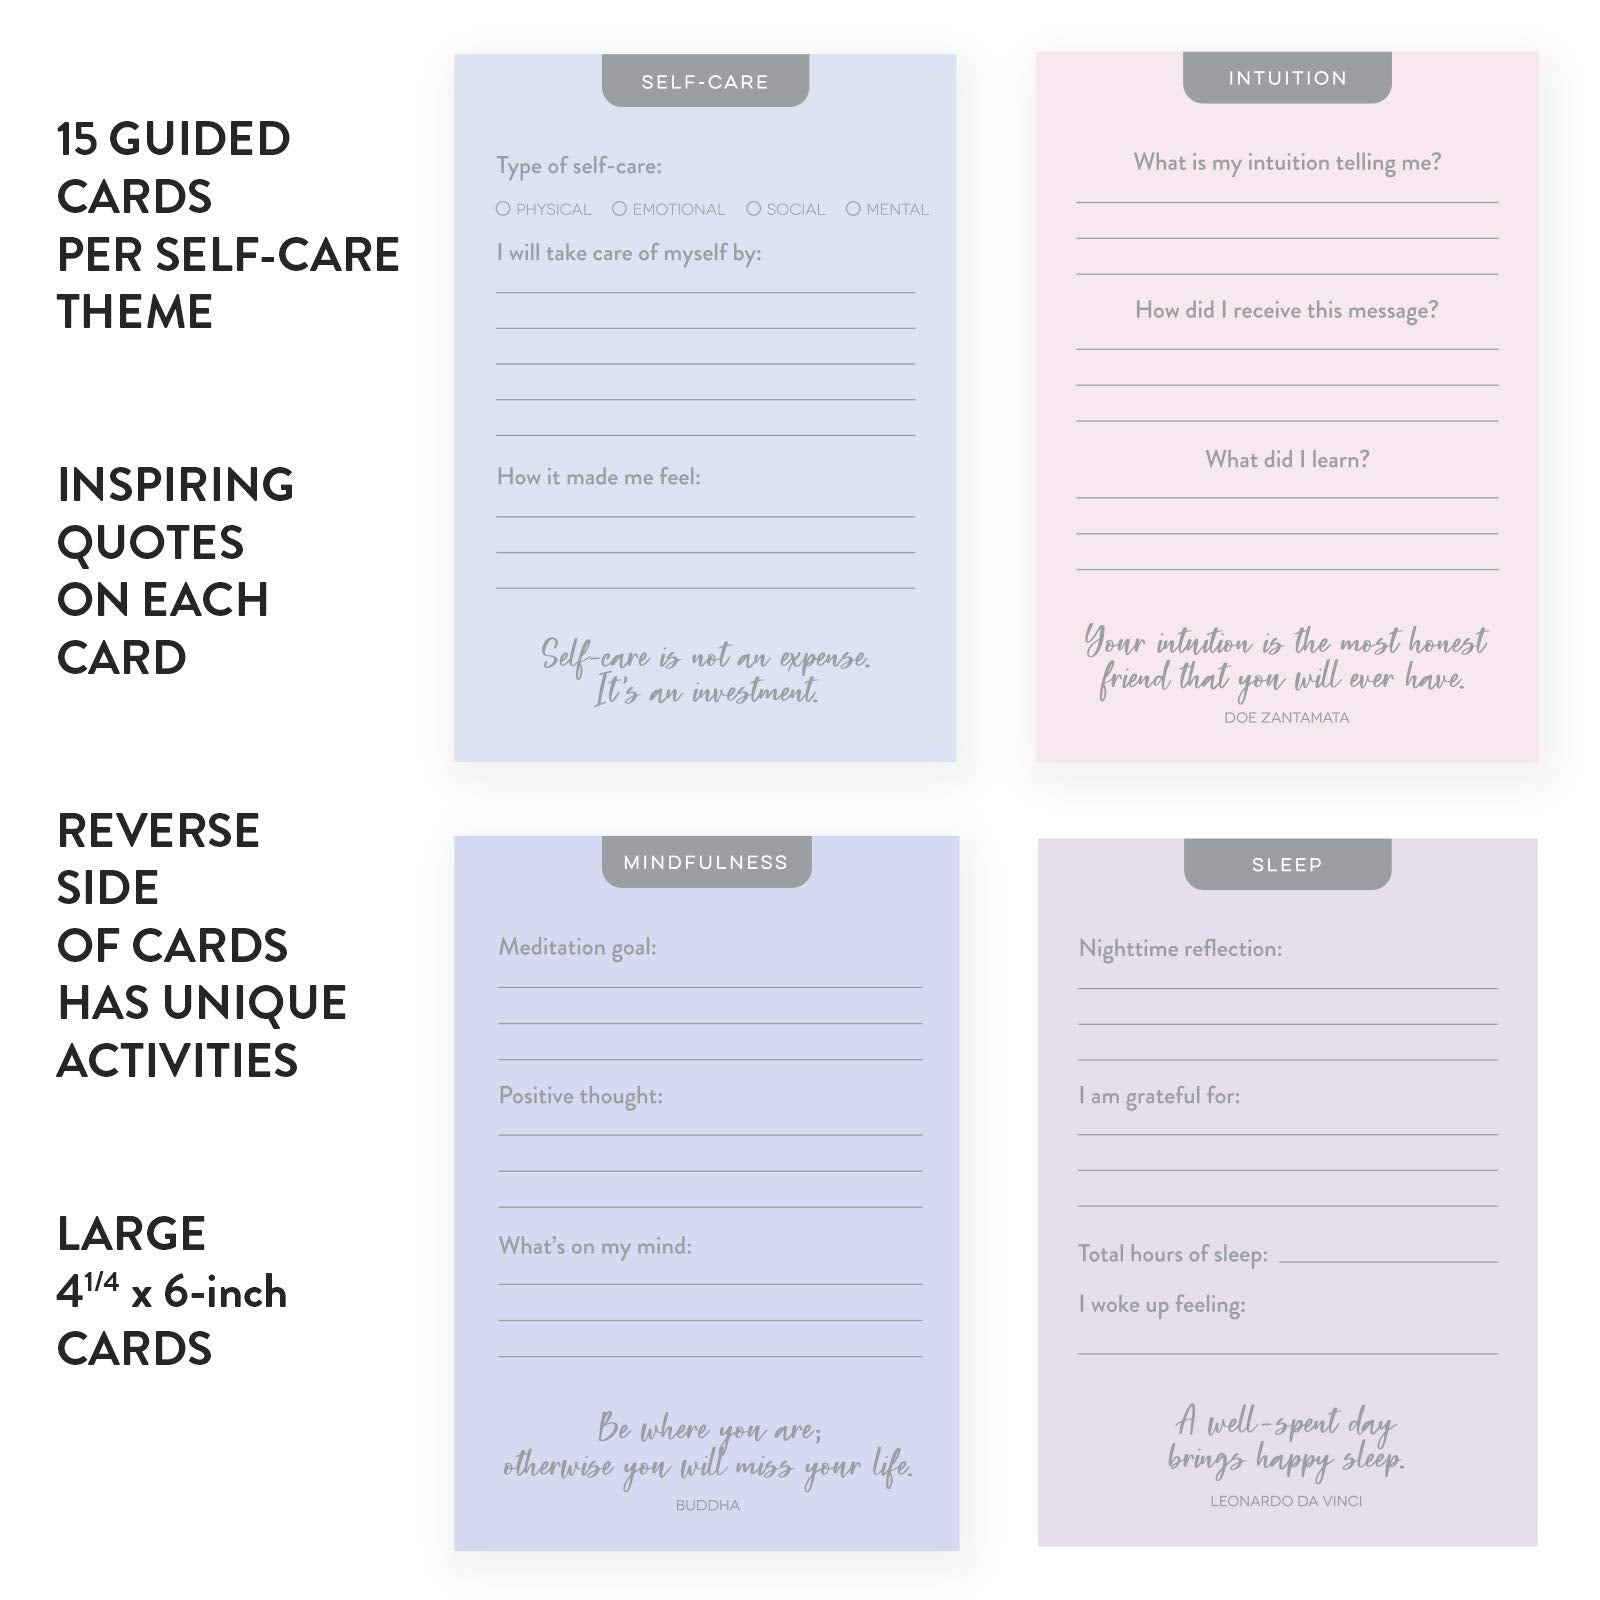 Self-Care Guided Cards from Eccolo